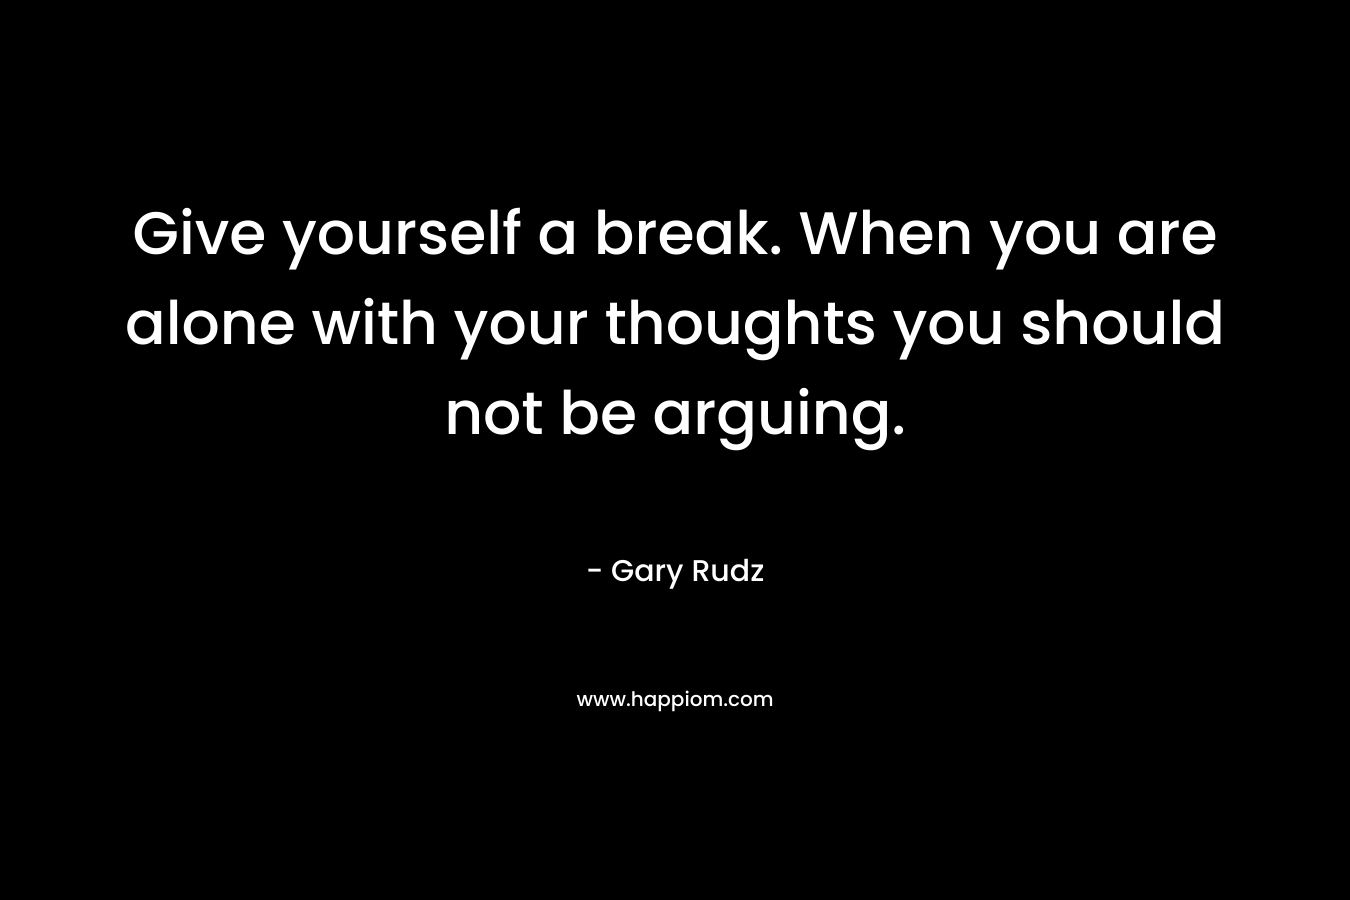 Give yourself a break. When you are alone with your thoughts you should not be arguing. – Gary Rudz